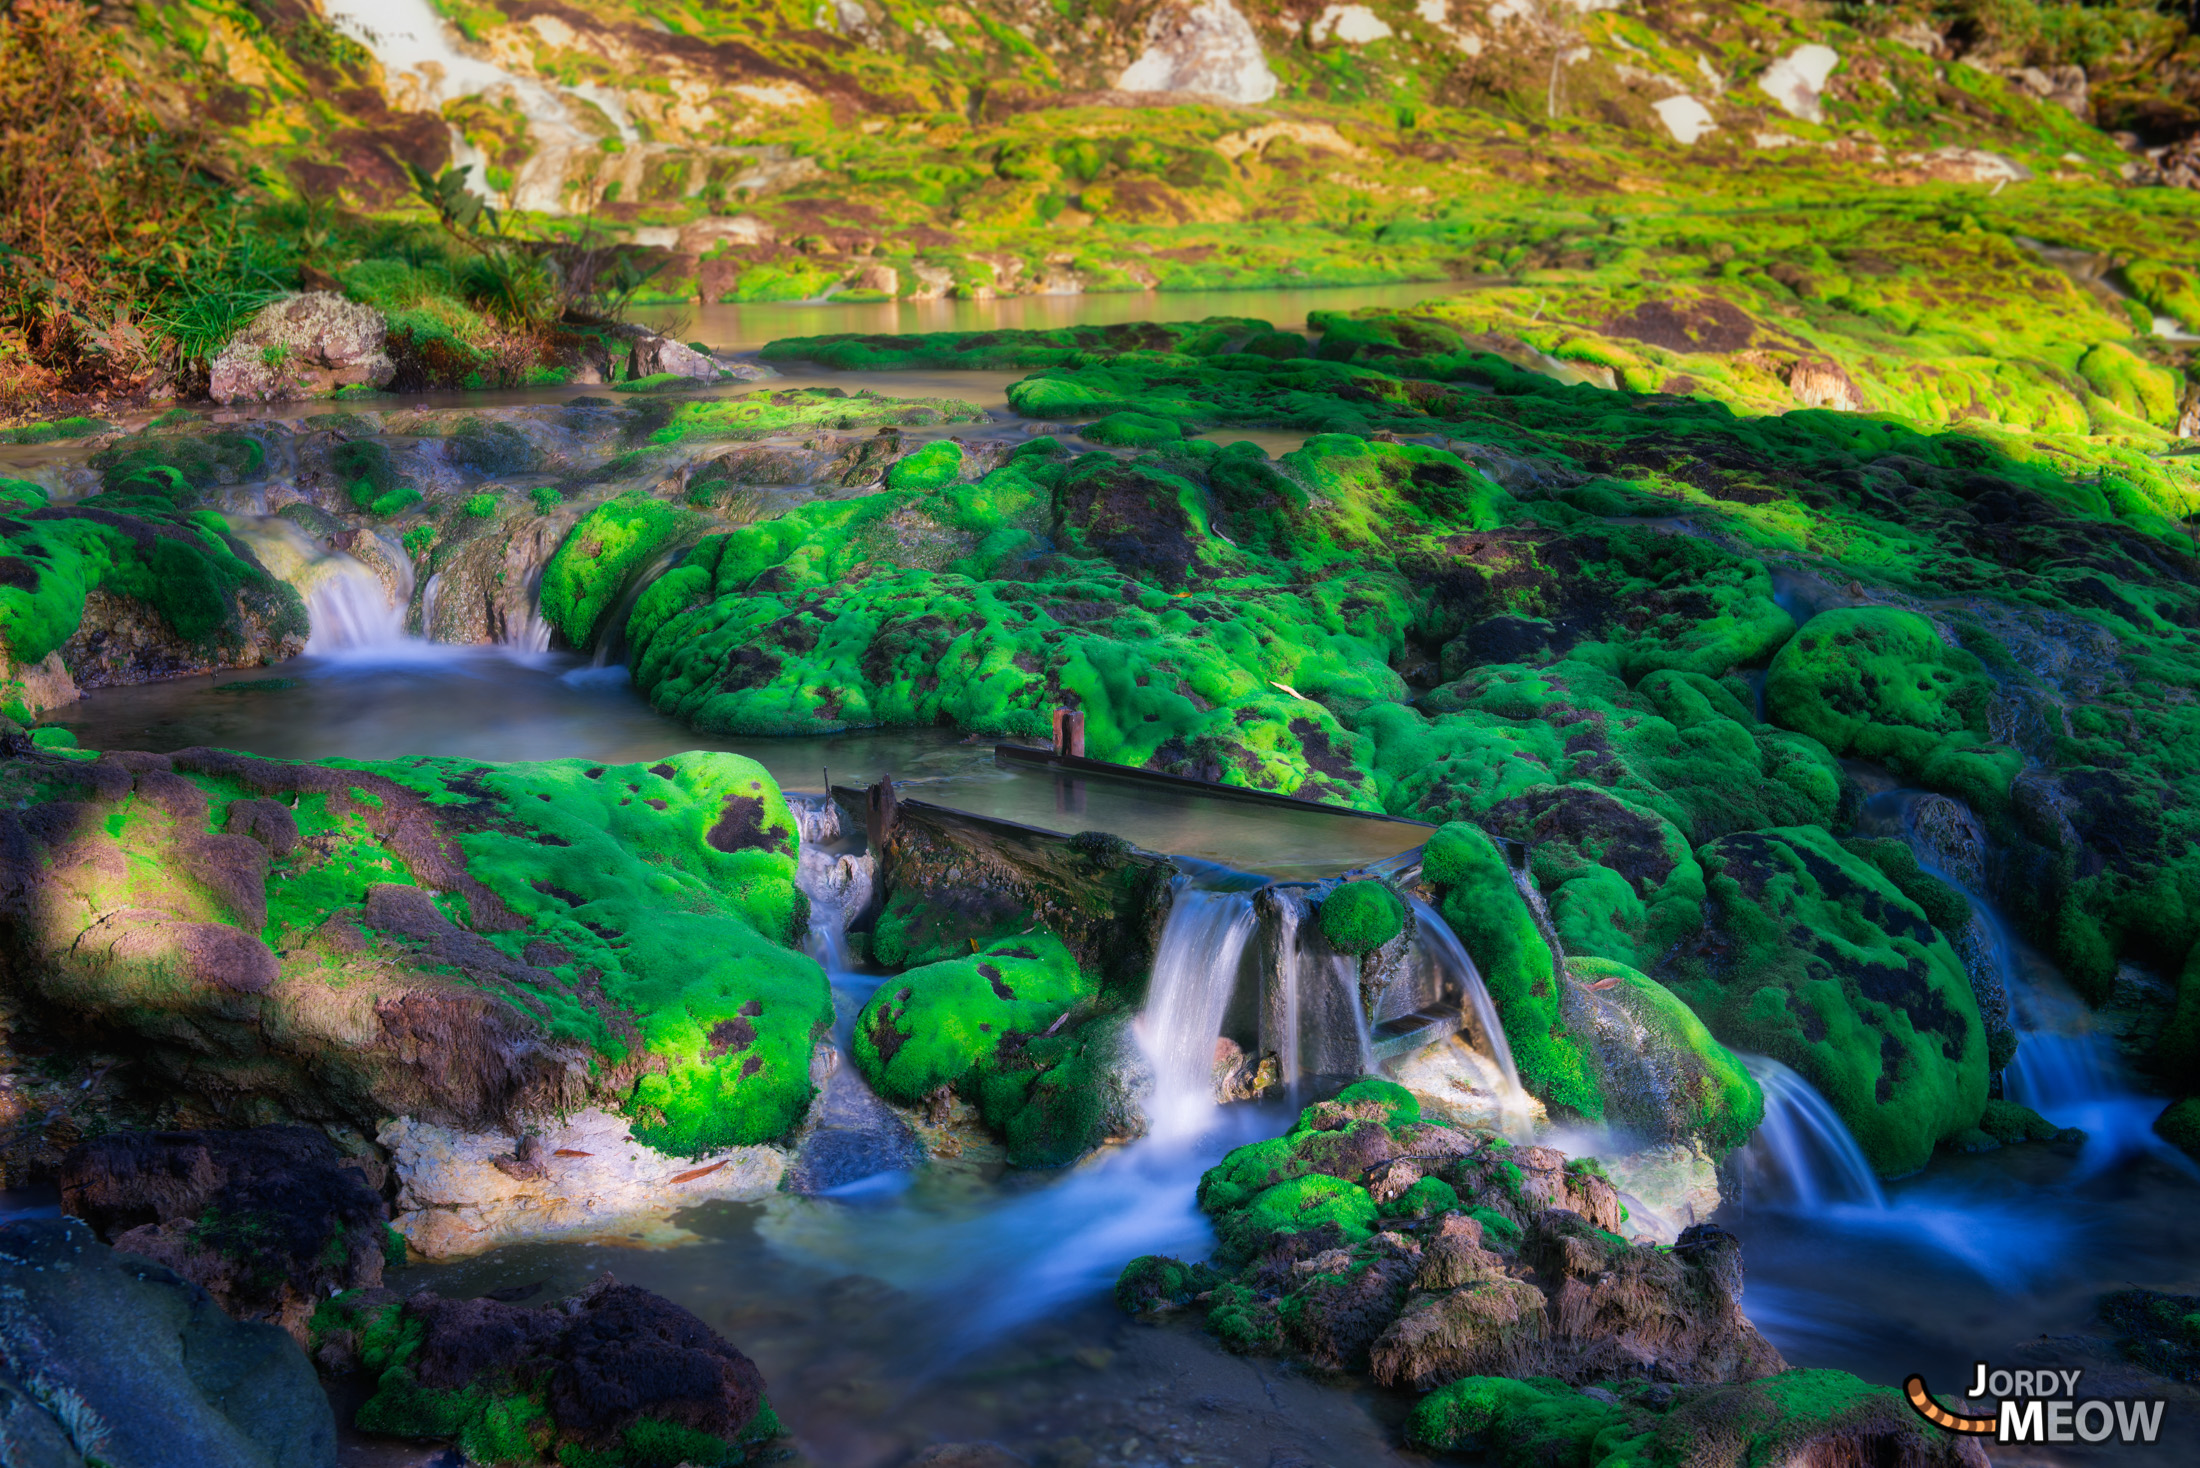 Captivating Mossy Landscape in Gunma, Japan - Enchanting Green Moss and Flowing Water Scene.